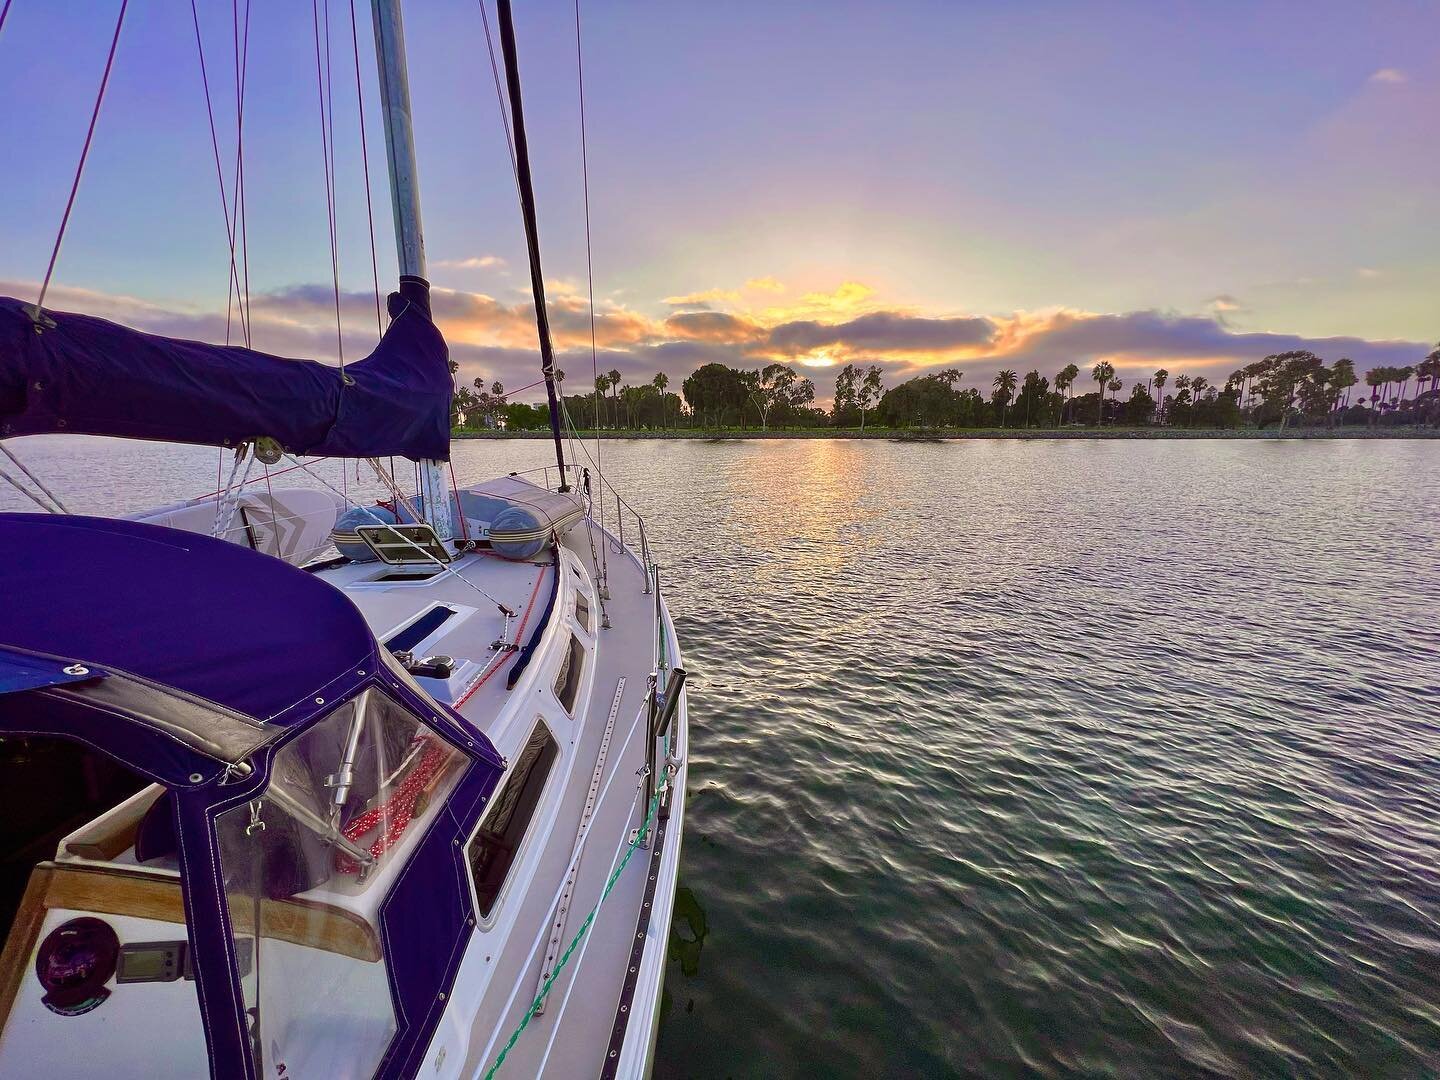 Took a much needed night off to relax at anchor. It&rsquo;s been exactly 1 year since buying this new boat and I&rsquo;m disappointed to admit this is the first time I&rsquo;ve ever anchored it out. Been too busy taking other peoples boats out. Feels